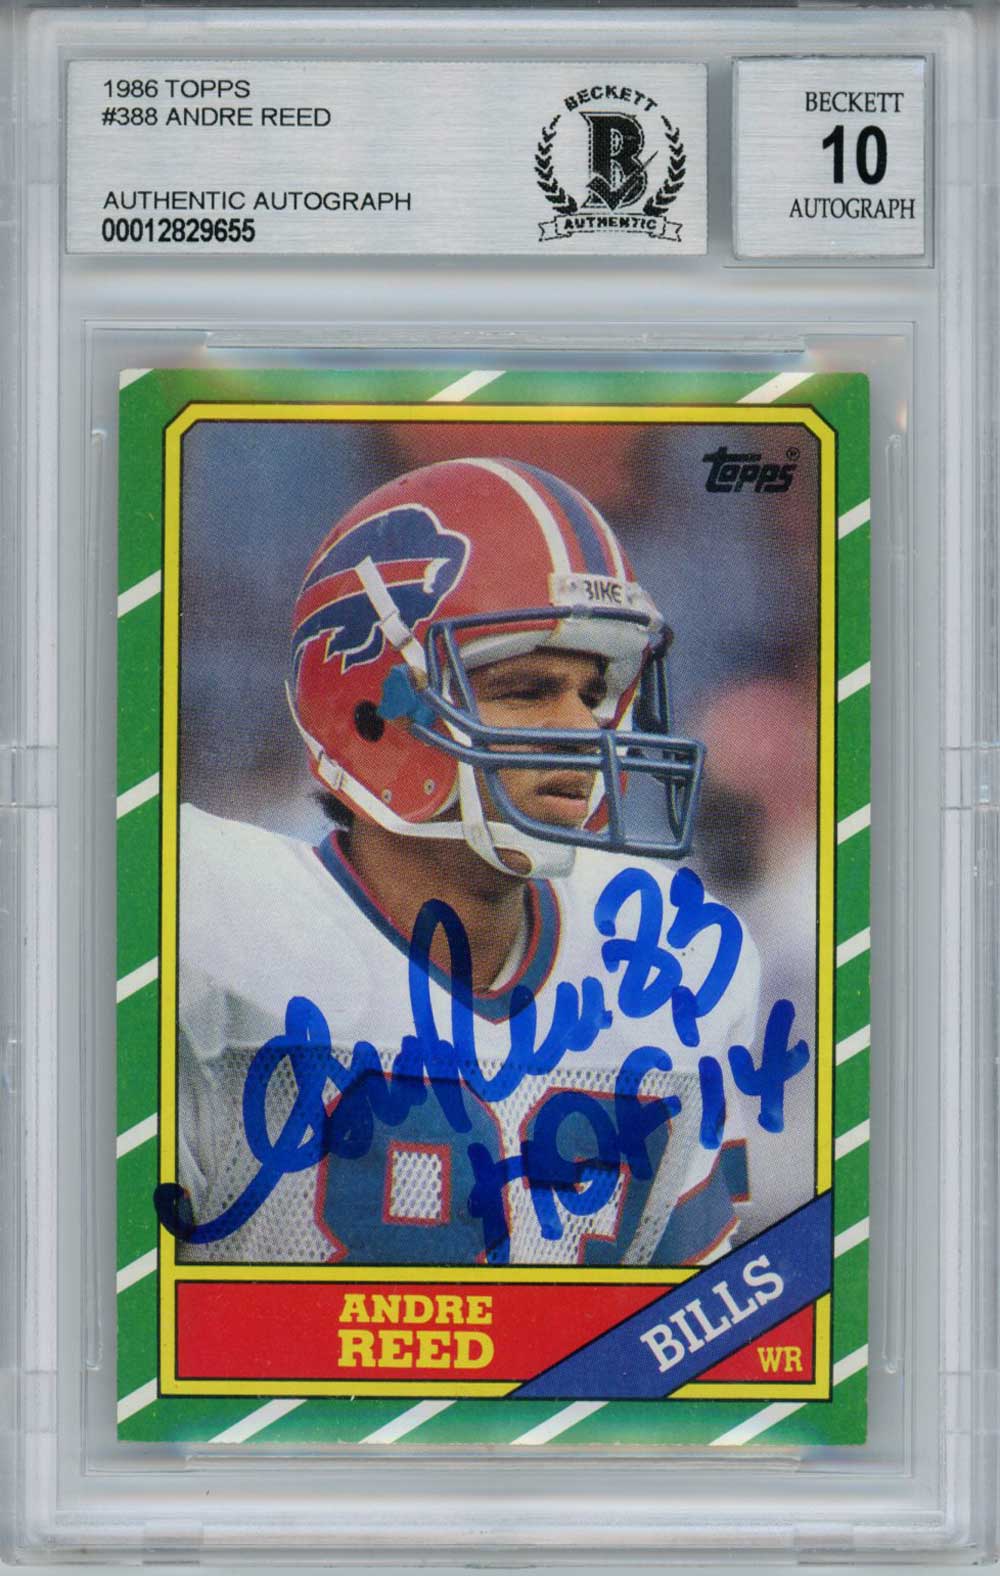 Andre Reed Autographed/Signed 1986 Topps #388 Rookie Card BAS 10 Slab 31397